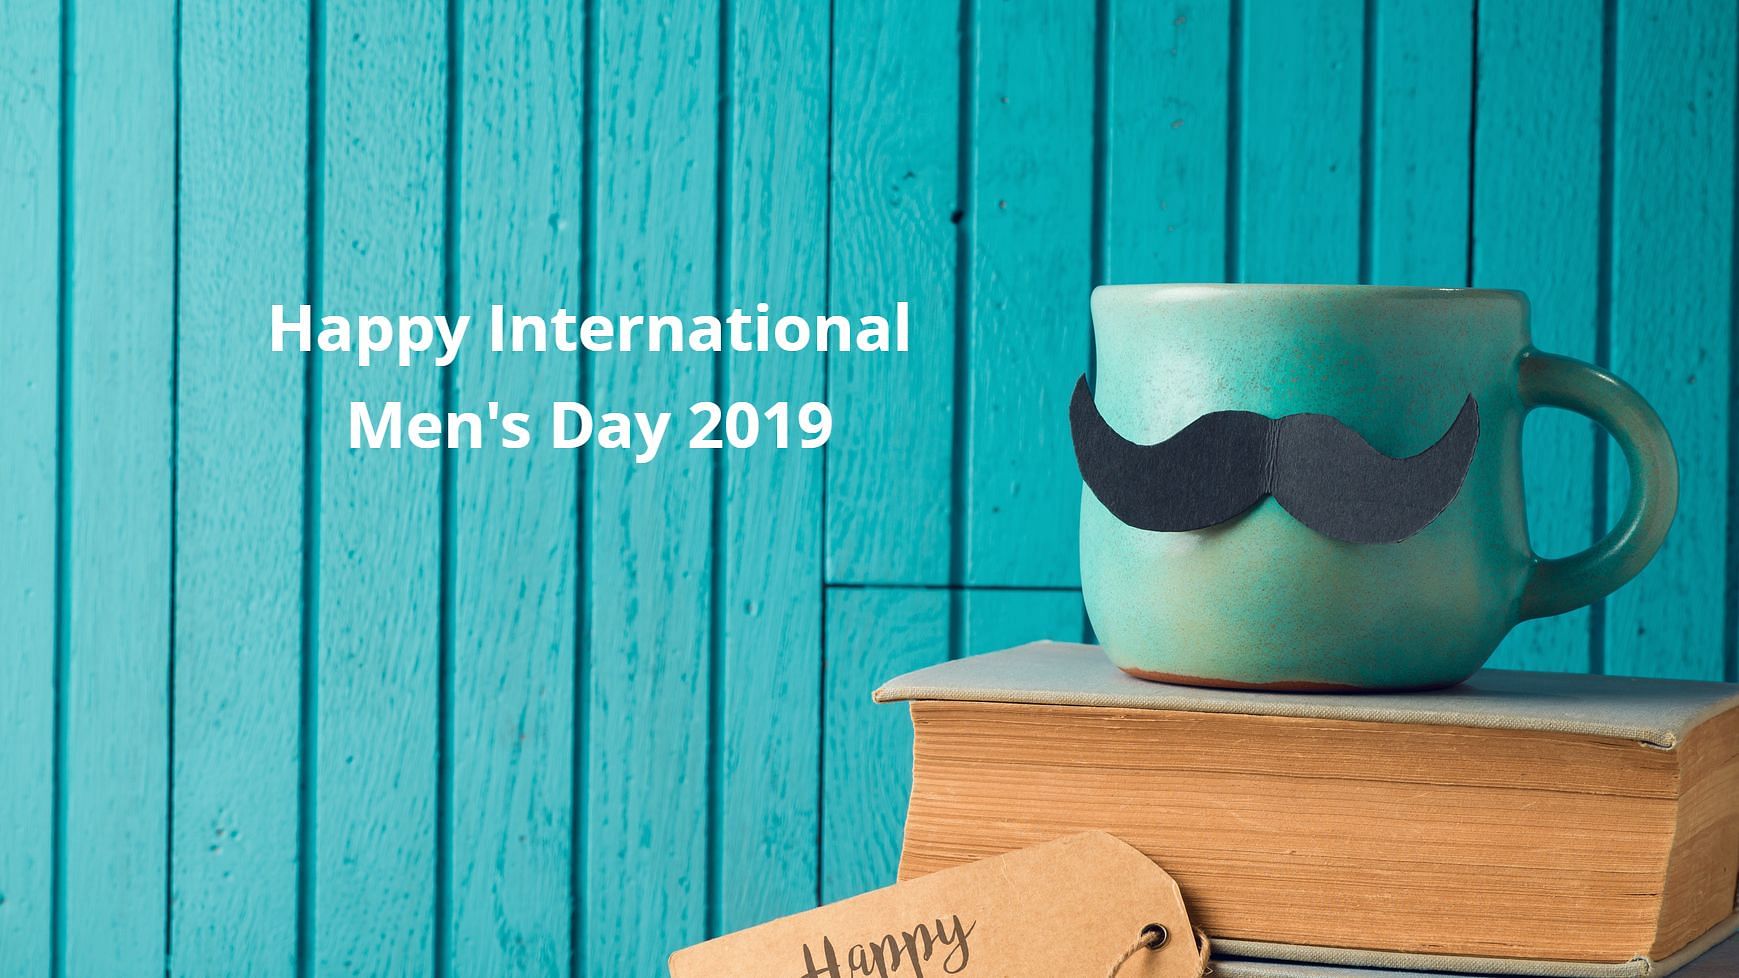 Happy International Men’s Day 2019 Wishes, SMS &amp; Quotes.&nbsp;